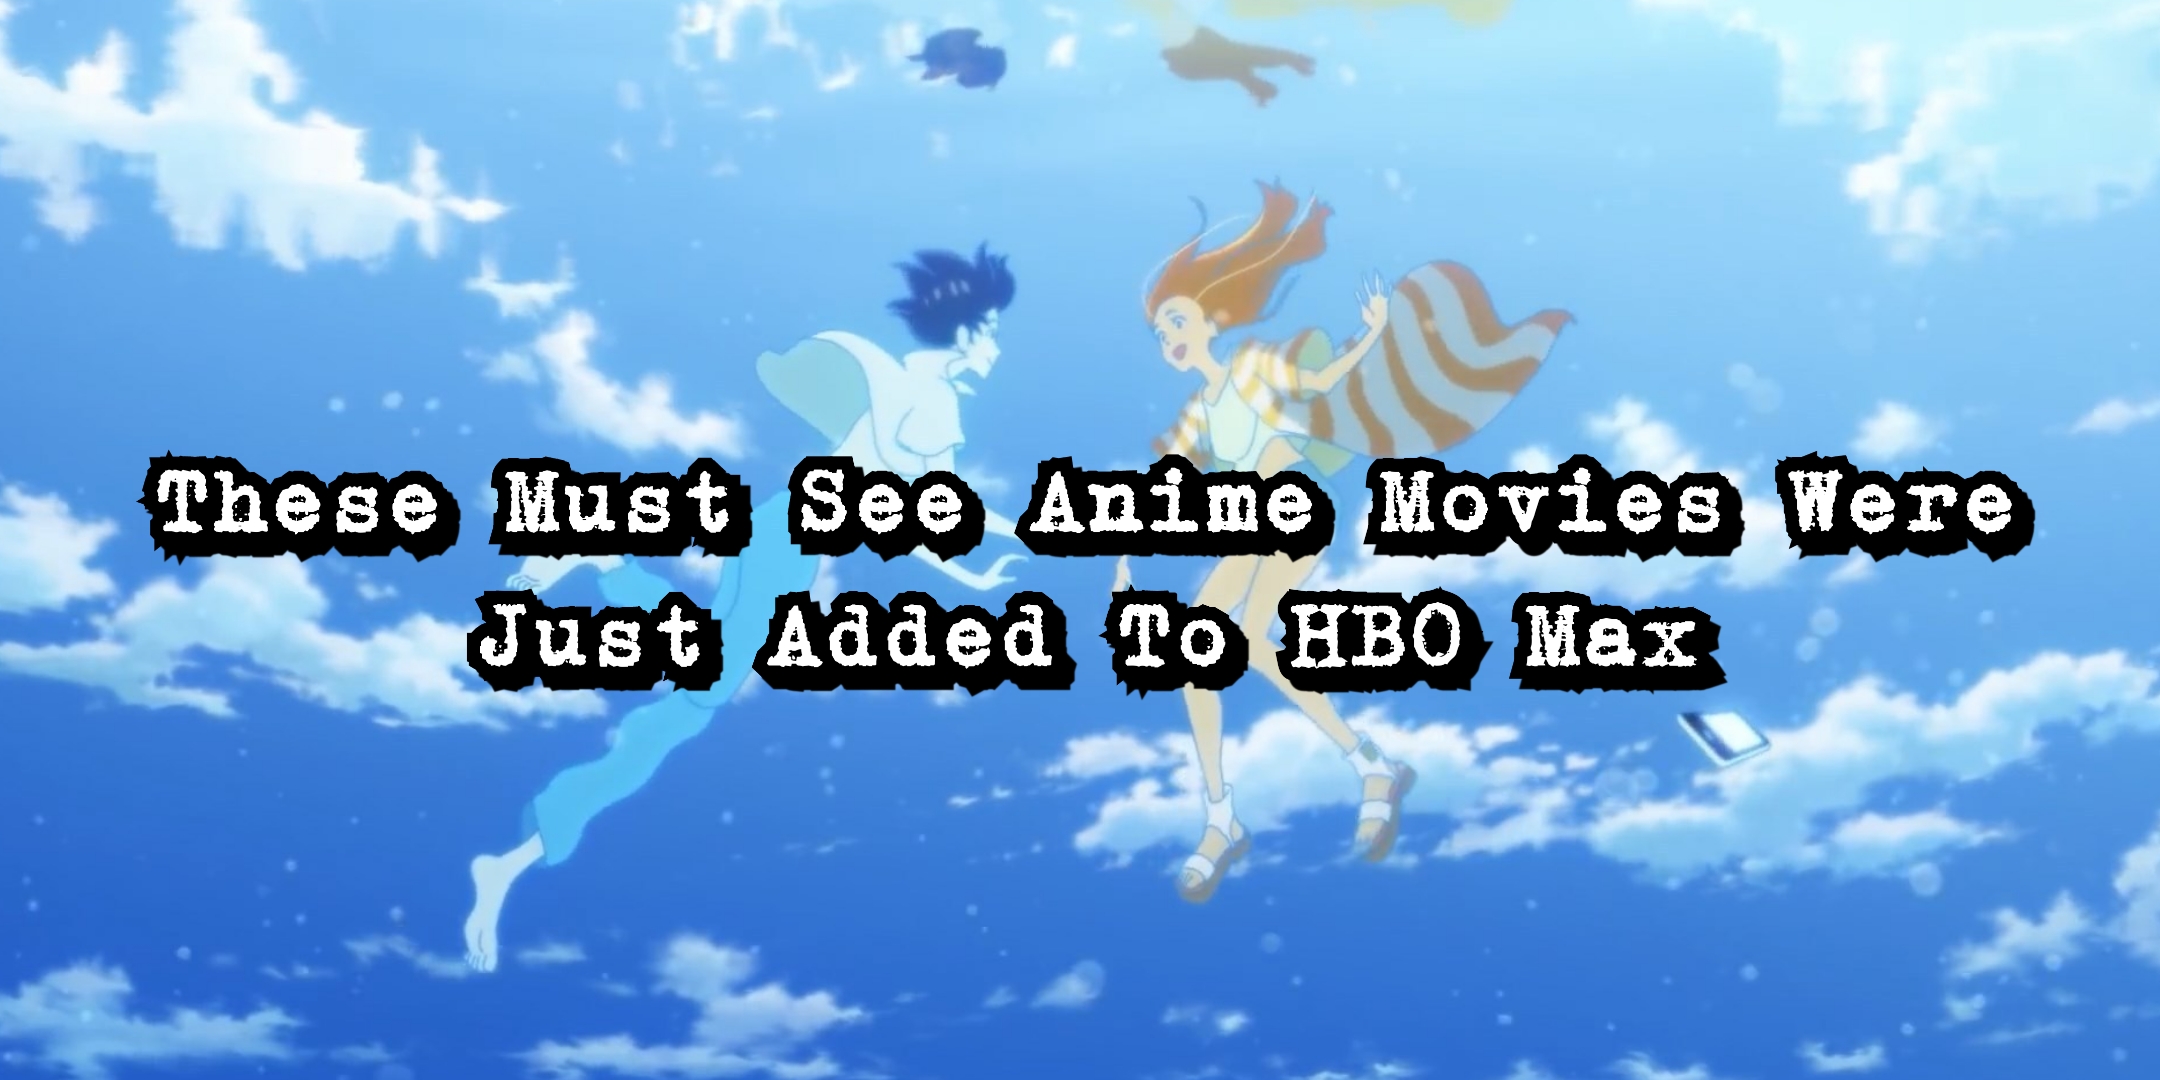 The best anime streaming on Netflix in the US